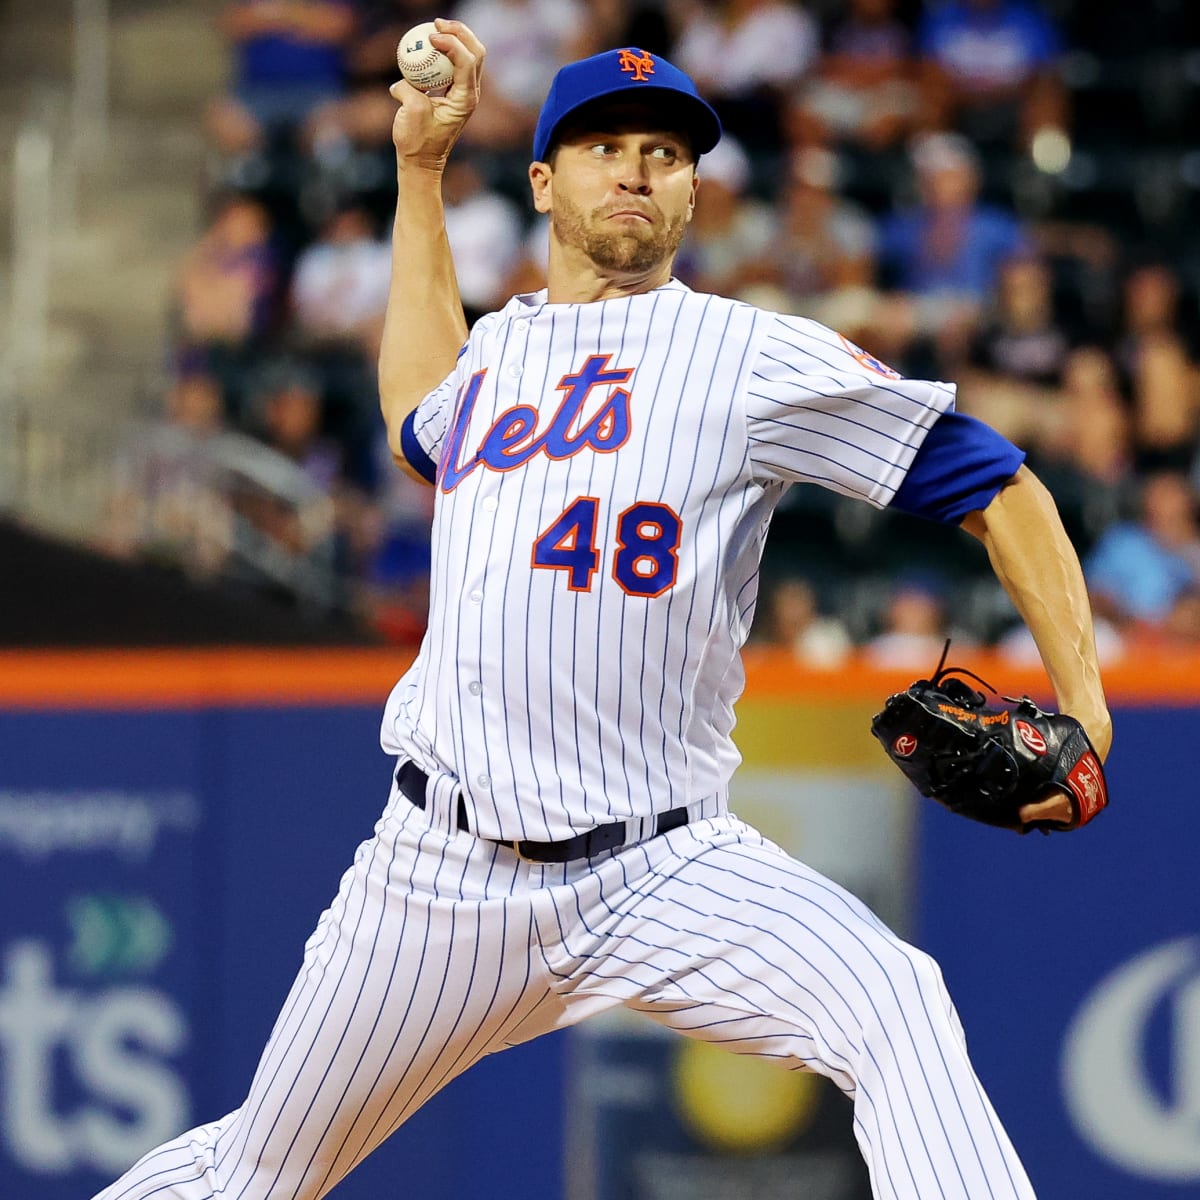 Jacob deGrom is better than ever as Mets make playoff push